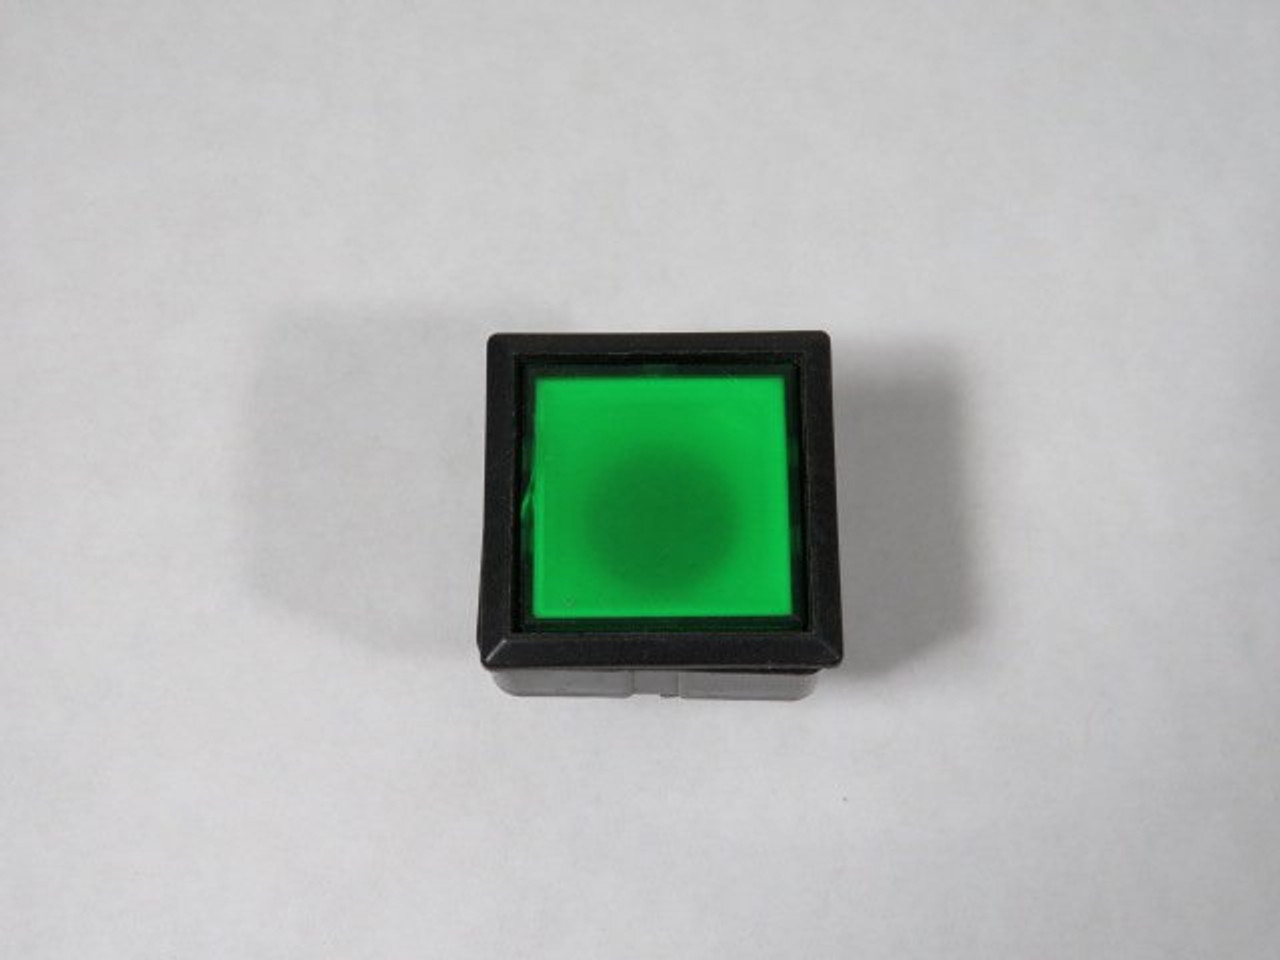 IDEC LW7L-M1-G Green Square Push Button Operator Only USED